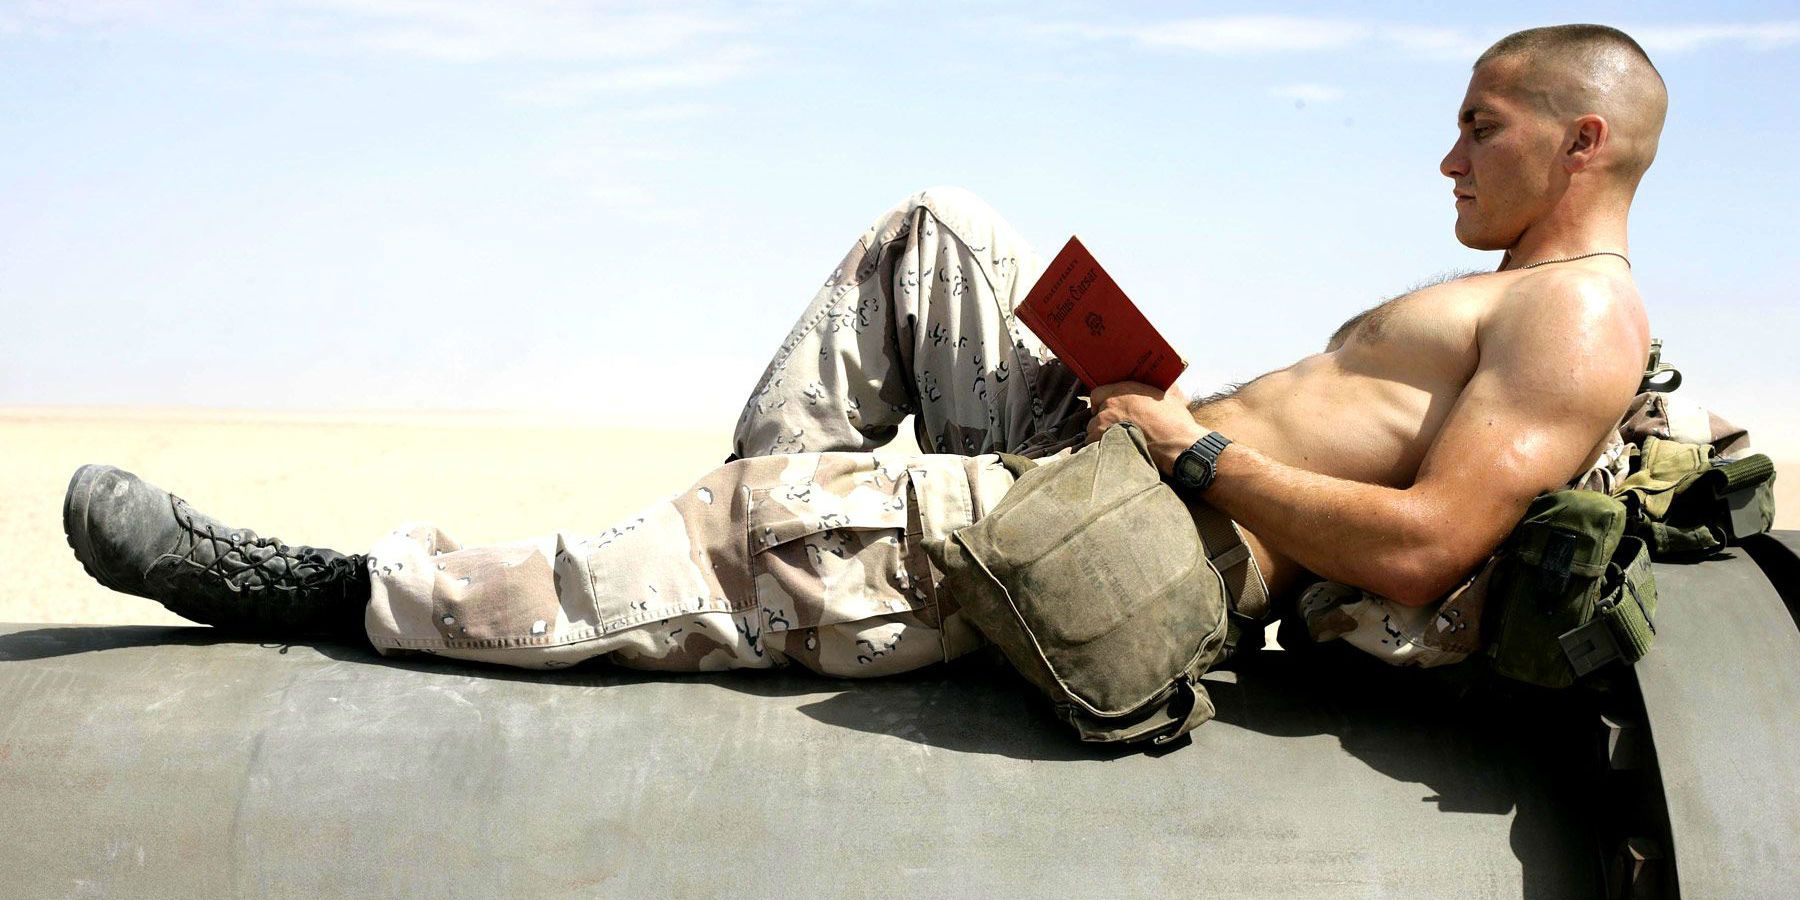 Anthony reading a book in Jarhead